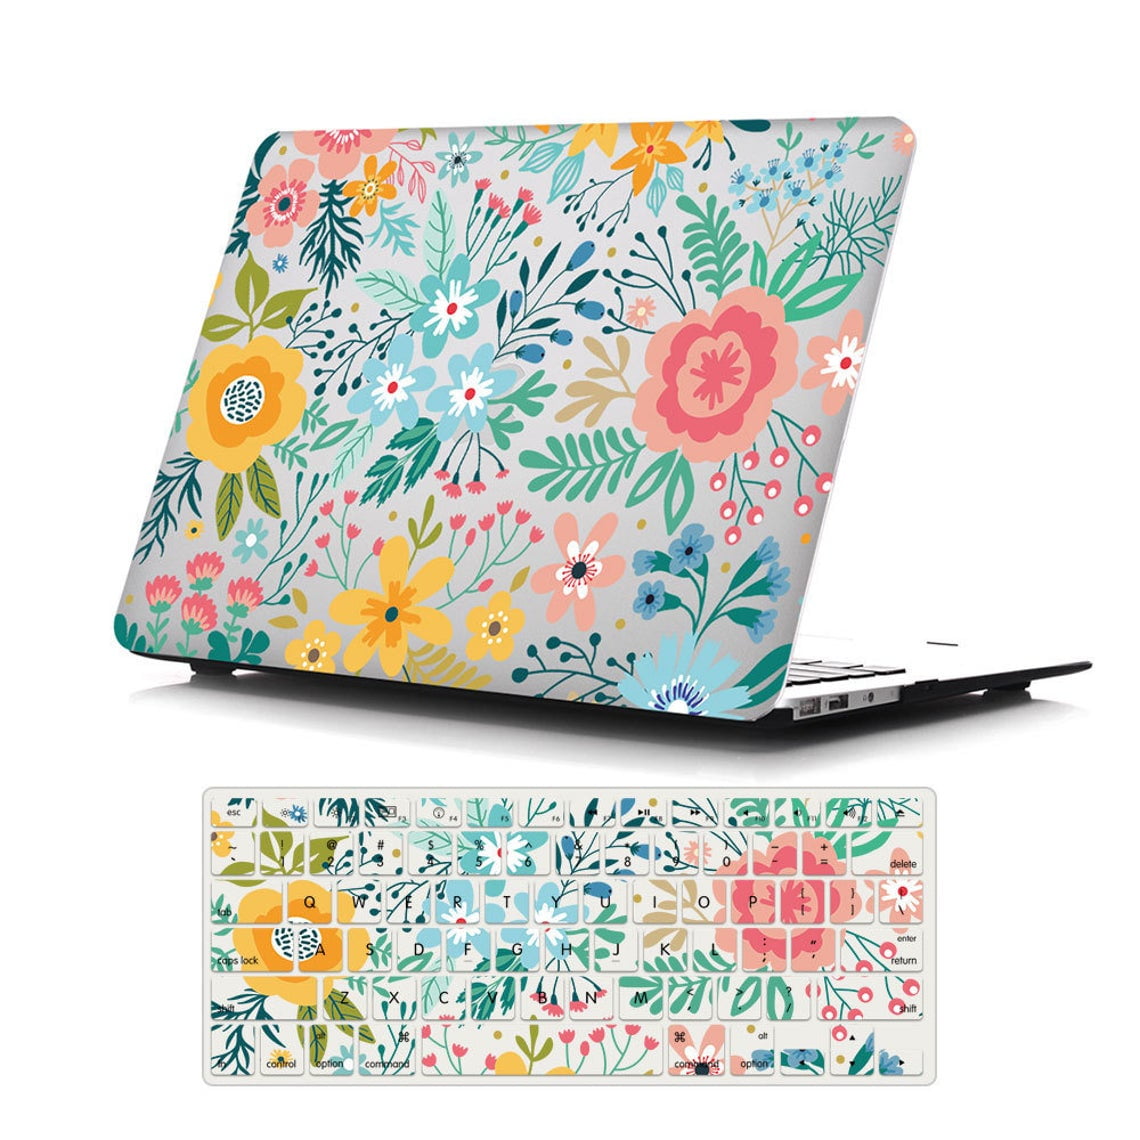 Spring Florals Pink Orange Design Cute Printing Shell Hard Case Rubberized Cover for MacBook Air 13 M1 Pro 2020 Pro 16 15 Air 11 12 Laptops